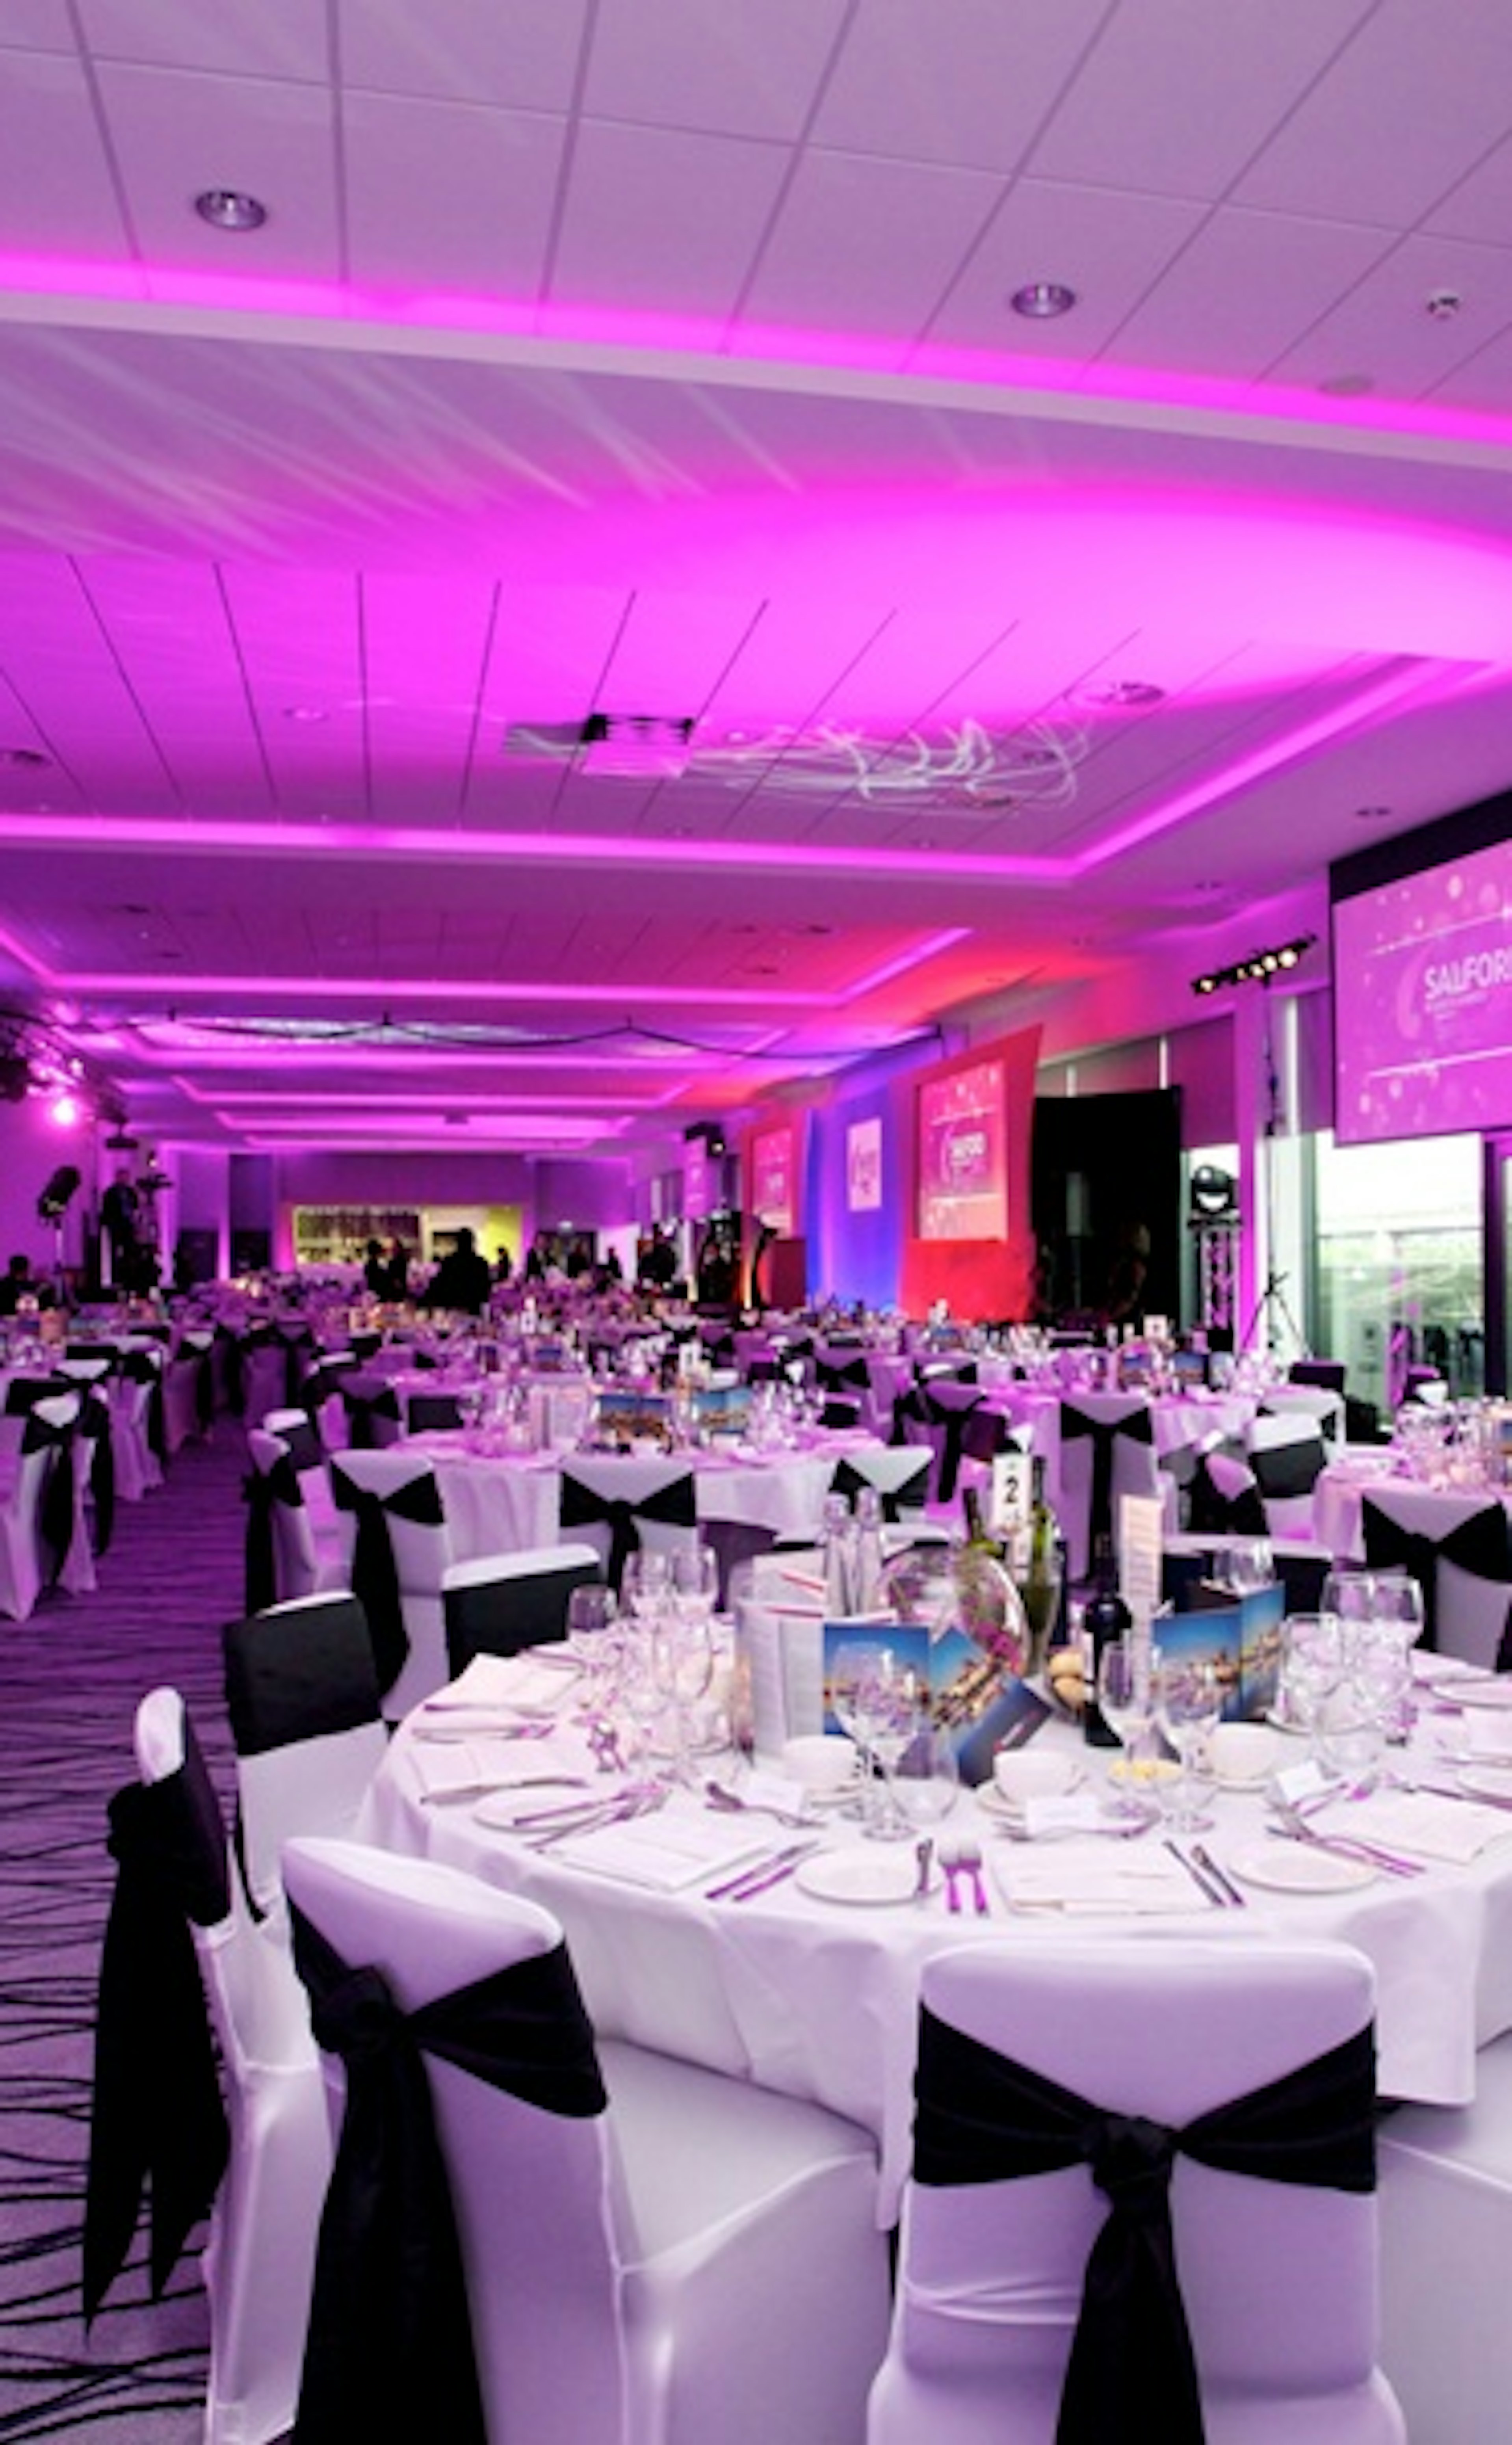 Large Conference Venues - AJ Bell Stadium